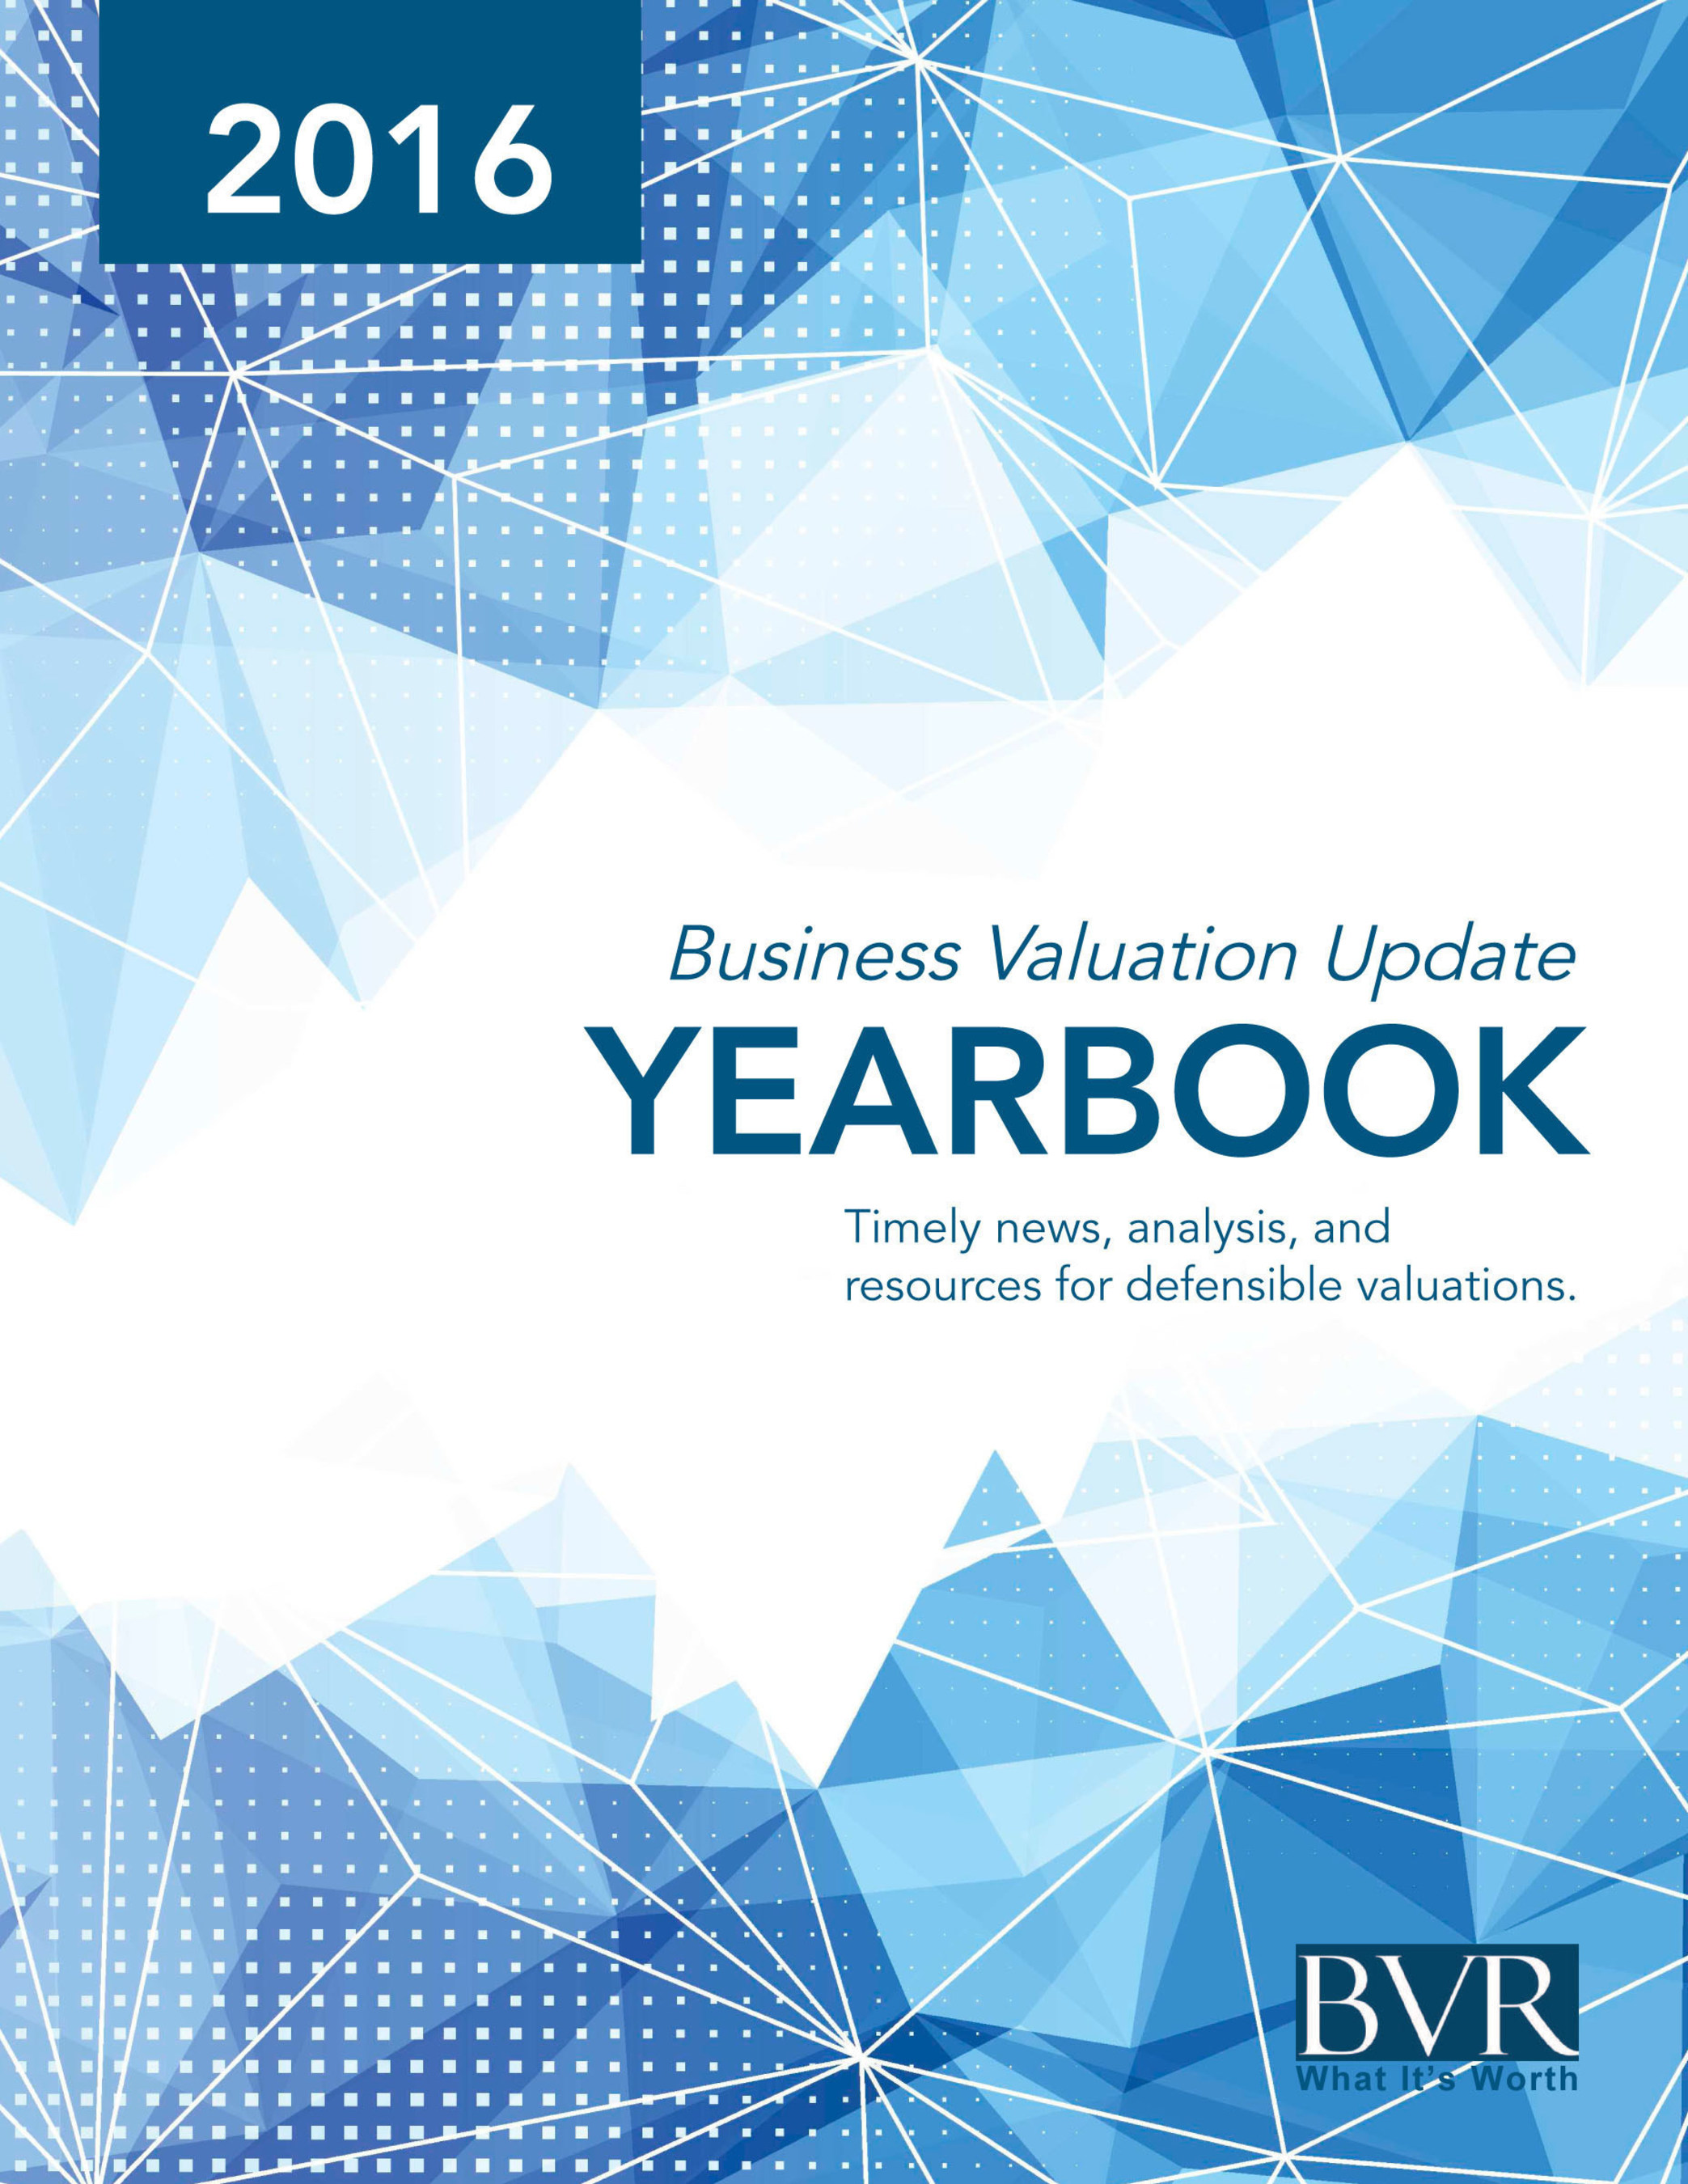 2016 Business Valuation Update Yearbook covers new methodology and evolving approaches.